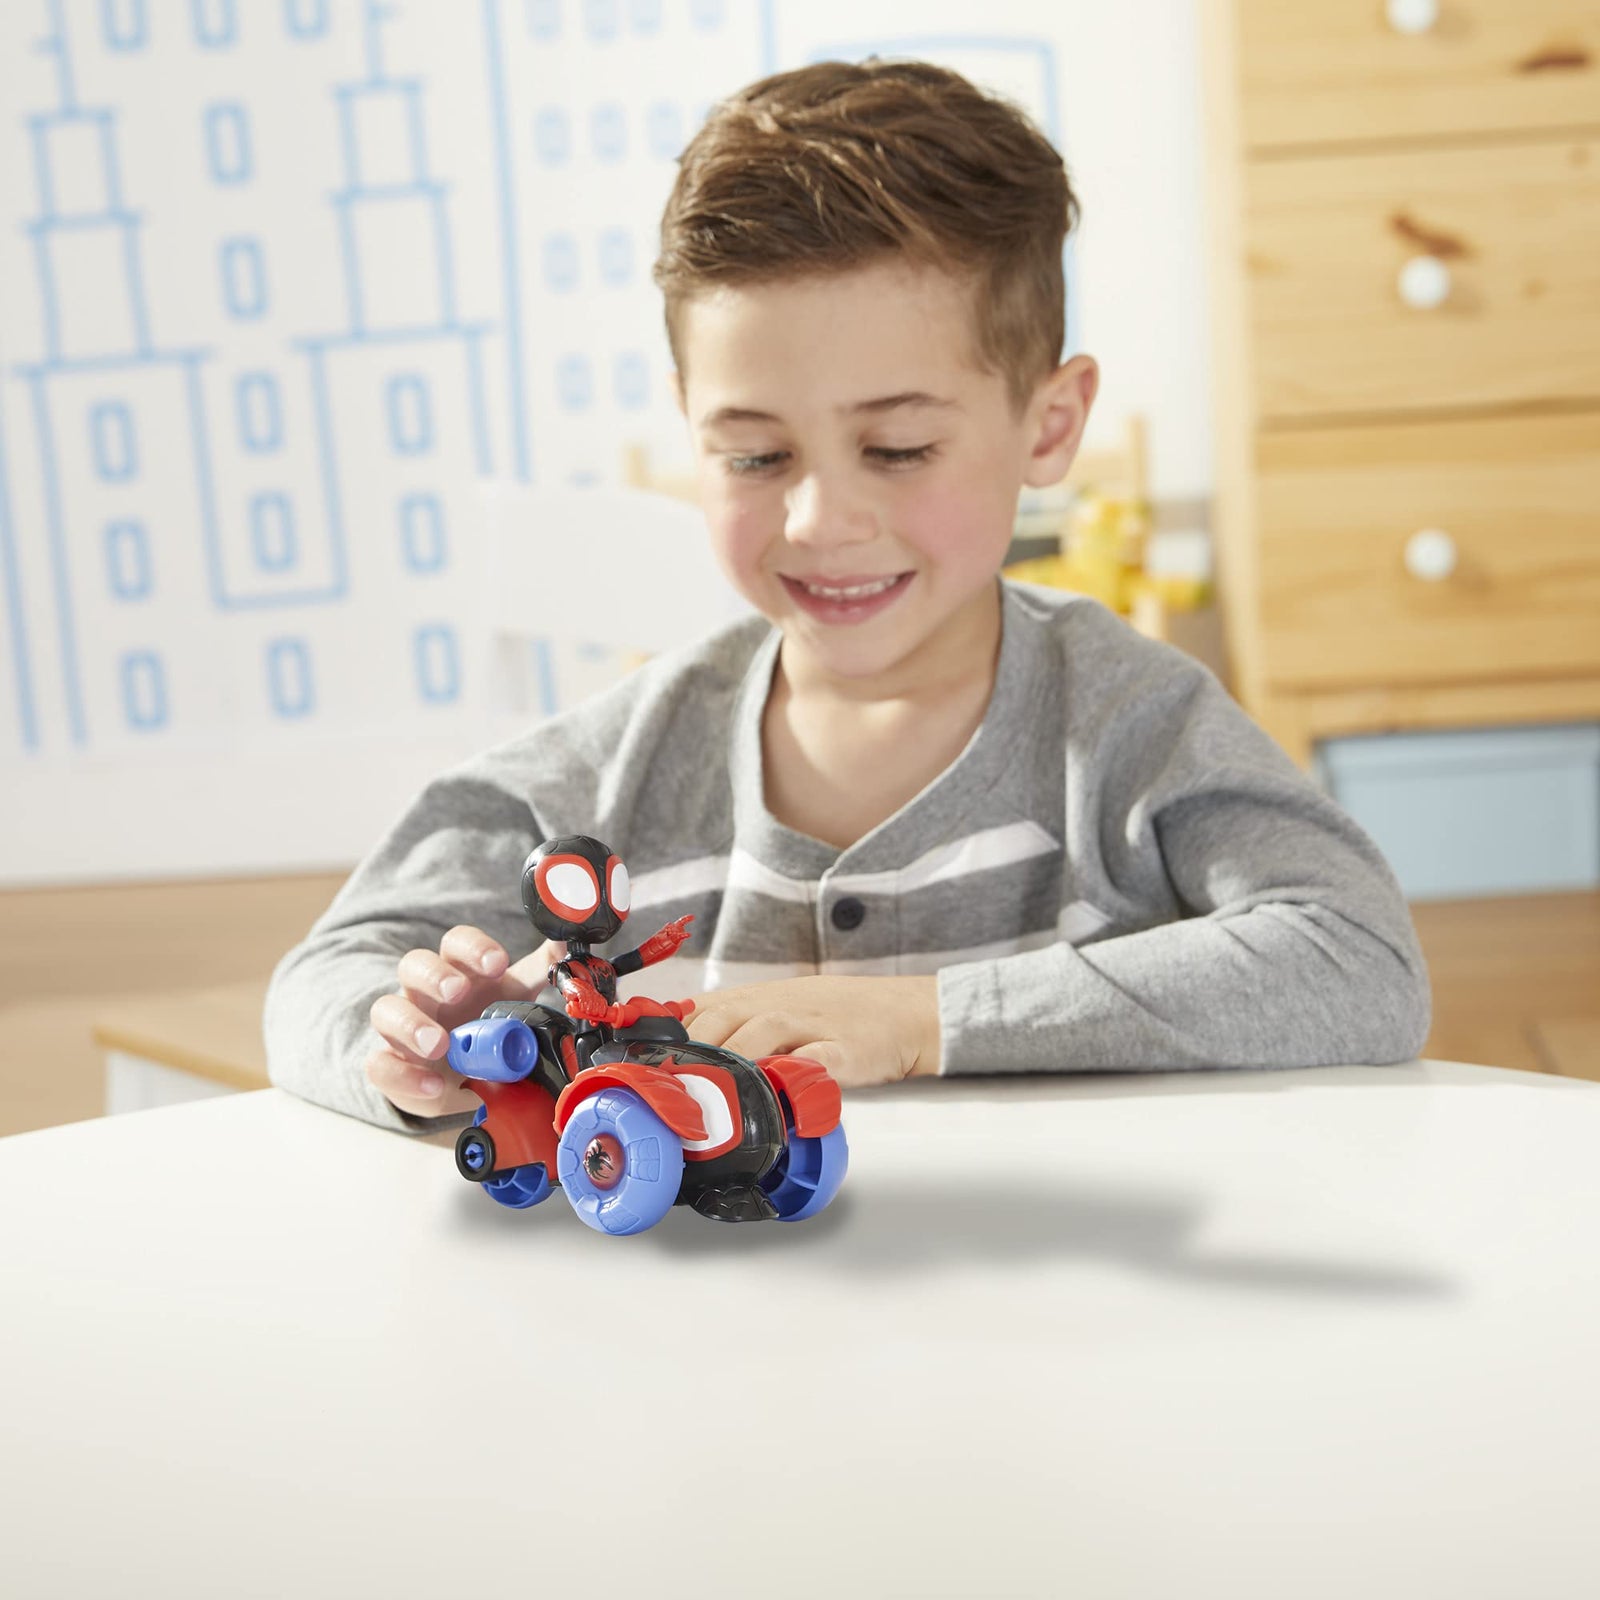 Marvel Spidey and His Amazing Friends Miles Morales Action Figure and Techno-Racer Vehicle, for Kids Ages 3 and Up